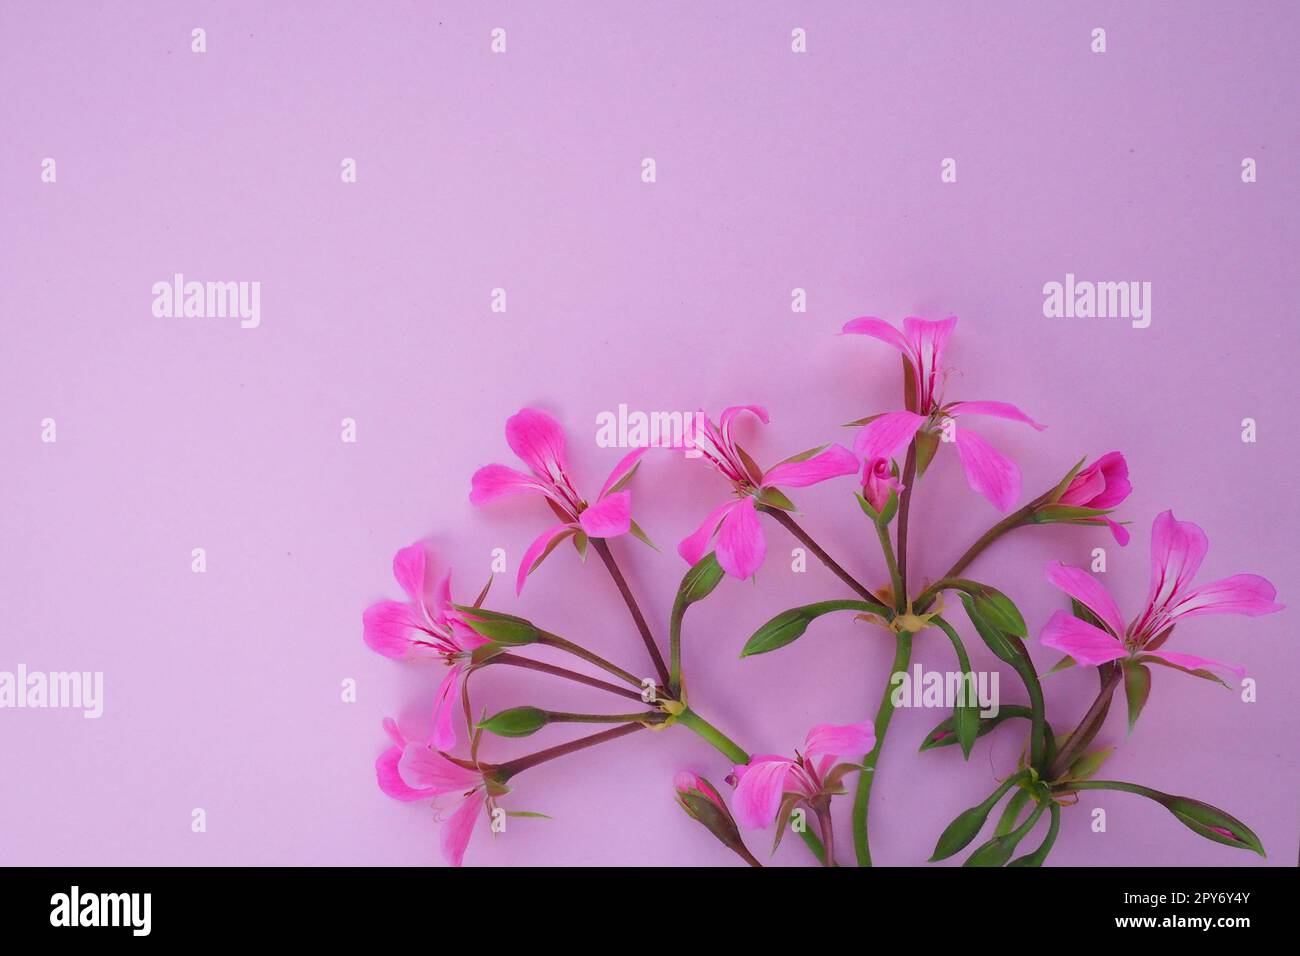 inflorescence of ivy geranium on a pink background. Beautiful inflorescence of pink ivy geranium in the bottom right corner. Copy space for text. Postcard for March 8, Valentine's Day, Mother's Day. Stock Photo